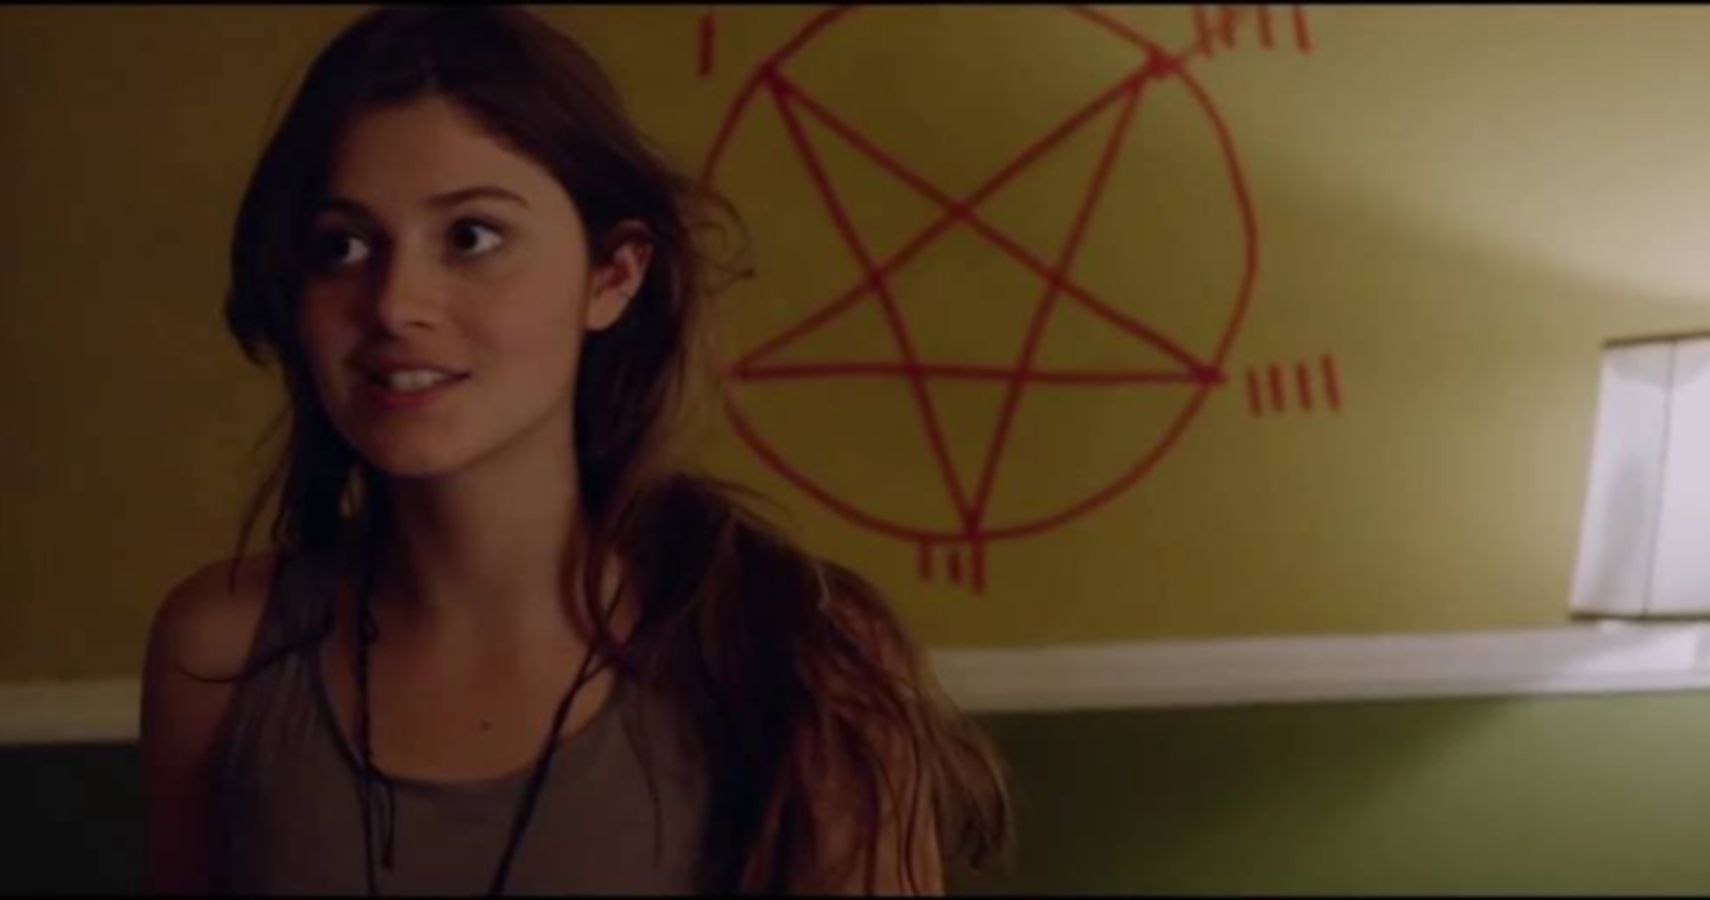 Actor standing in front of a pentagram on the wall in Satanic